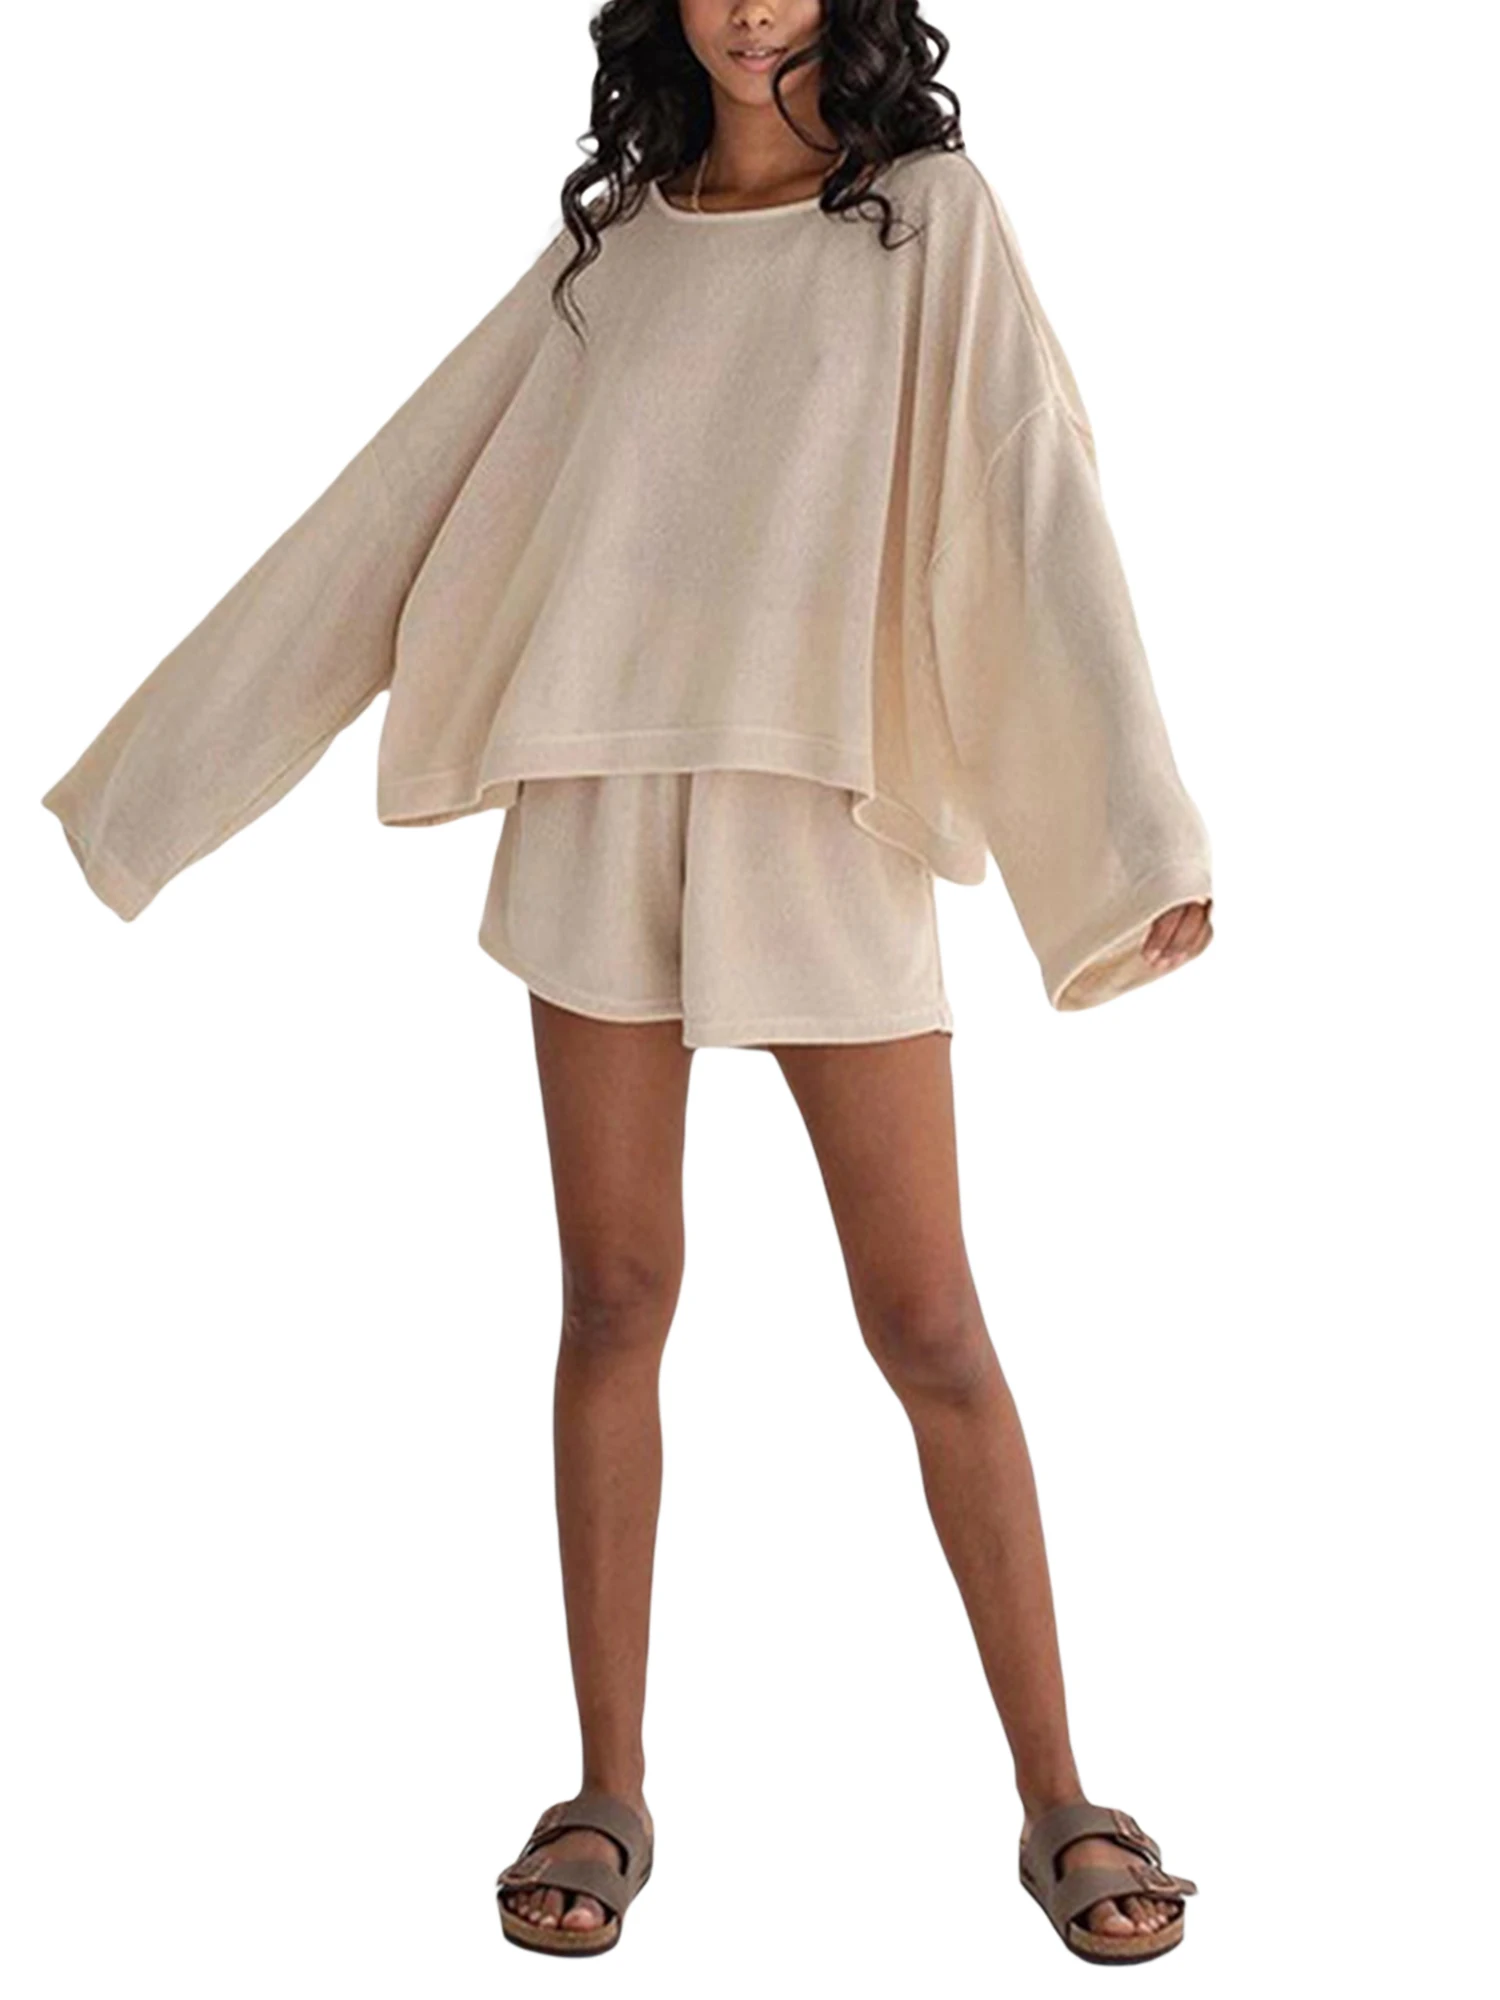 

Women s 2-Piece Pajama Set Cozy Loungewear with Solid Color Crew Neck Top and Shorts for a Relaxing Sleepwear Ensemble